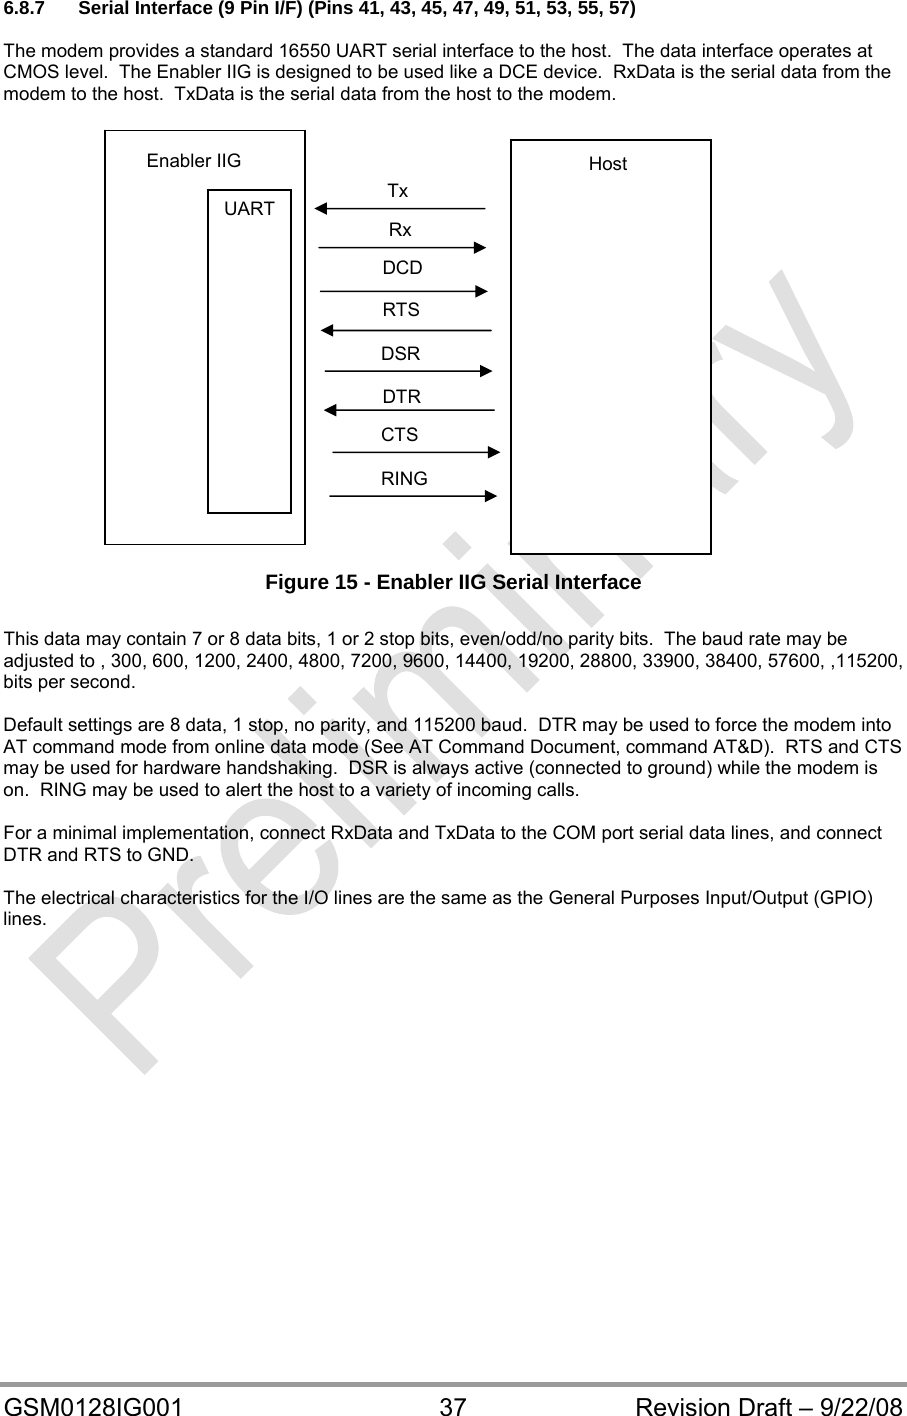  GSM0128IG001  37  Revision Draft – 9/22/08 6.8.7  Serial Interface (9 Pin I/F) (Pins 41, 43, 45, 47, 49, 51, 53, 55, 57)  The modem provides a standard 16550 UART serial interface to the host.  The data interface operates at CMOS level.  The Enabler IIG is designed to be used like a DCE device.  RxData is the serial data from the modem to the host.  TxData is the serial data from the host to the modem.                       Figure 15 - Enabler IIG Serial Interface  This data may contain 7 or 8 data bits, 1 or 2 stop bits, even/odd/no parity bits.  The baud rate may be adjusted to , 300, 600, 1200, 2400, 4800, 7200, 9600, 14400, 19200, 28800, 33900, 38400, 57600, ,115200, bits per second.  Default settings are 8 data, 1 stop, no parity, and 115200 baud.  DTR may be used to force the modem into AT command mode from online data mode (See AT Command Document, command AT&amp;D).  RTS and CTS may be used for hardware handshaking.  DSR is always active (connected to ground) while the modem is on.  RING may be used to alert the host to a variety of incoming calls.  For a minimal implementation, connect RxData and TxData to the COM port serial data lines, and connect DTR and RTS to GND.  The electrical characteristics for the I/O lines are the same as the General Purposes Input/Output (GPIO) lines. RING CTS DTR DSR RTS Rx Tx Enabler IIG UART DCD Host 